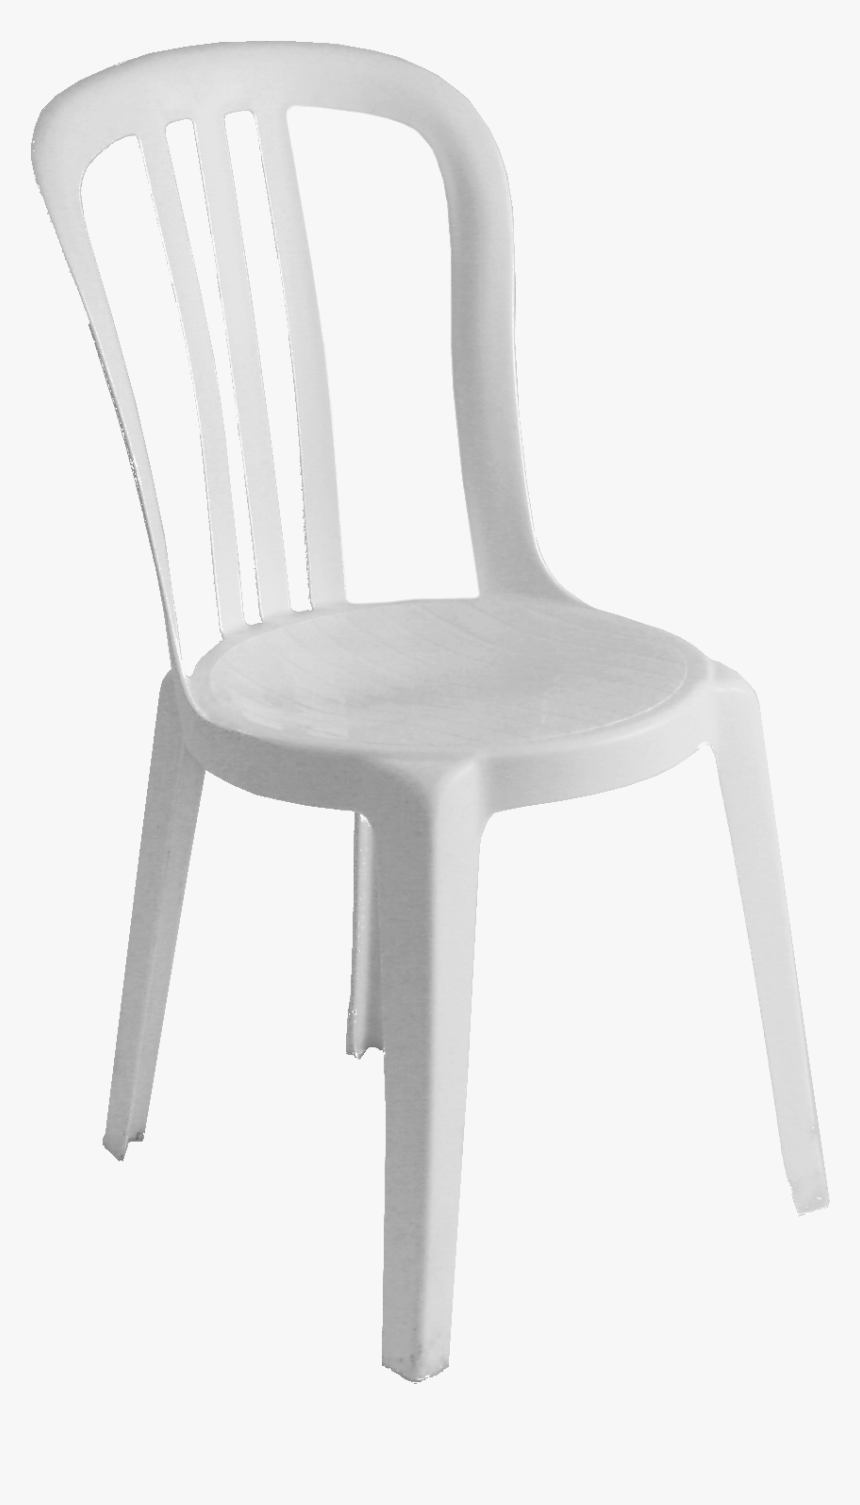 White Bistro Chairs - White Plastic Chair Png, Transparent Png, Free Download